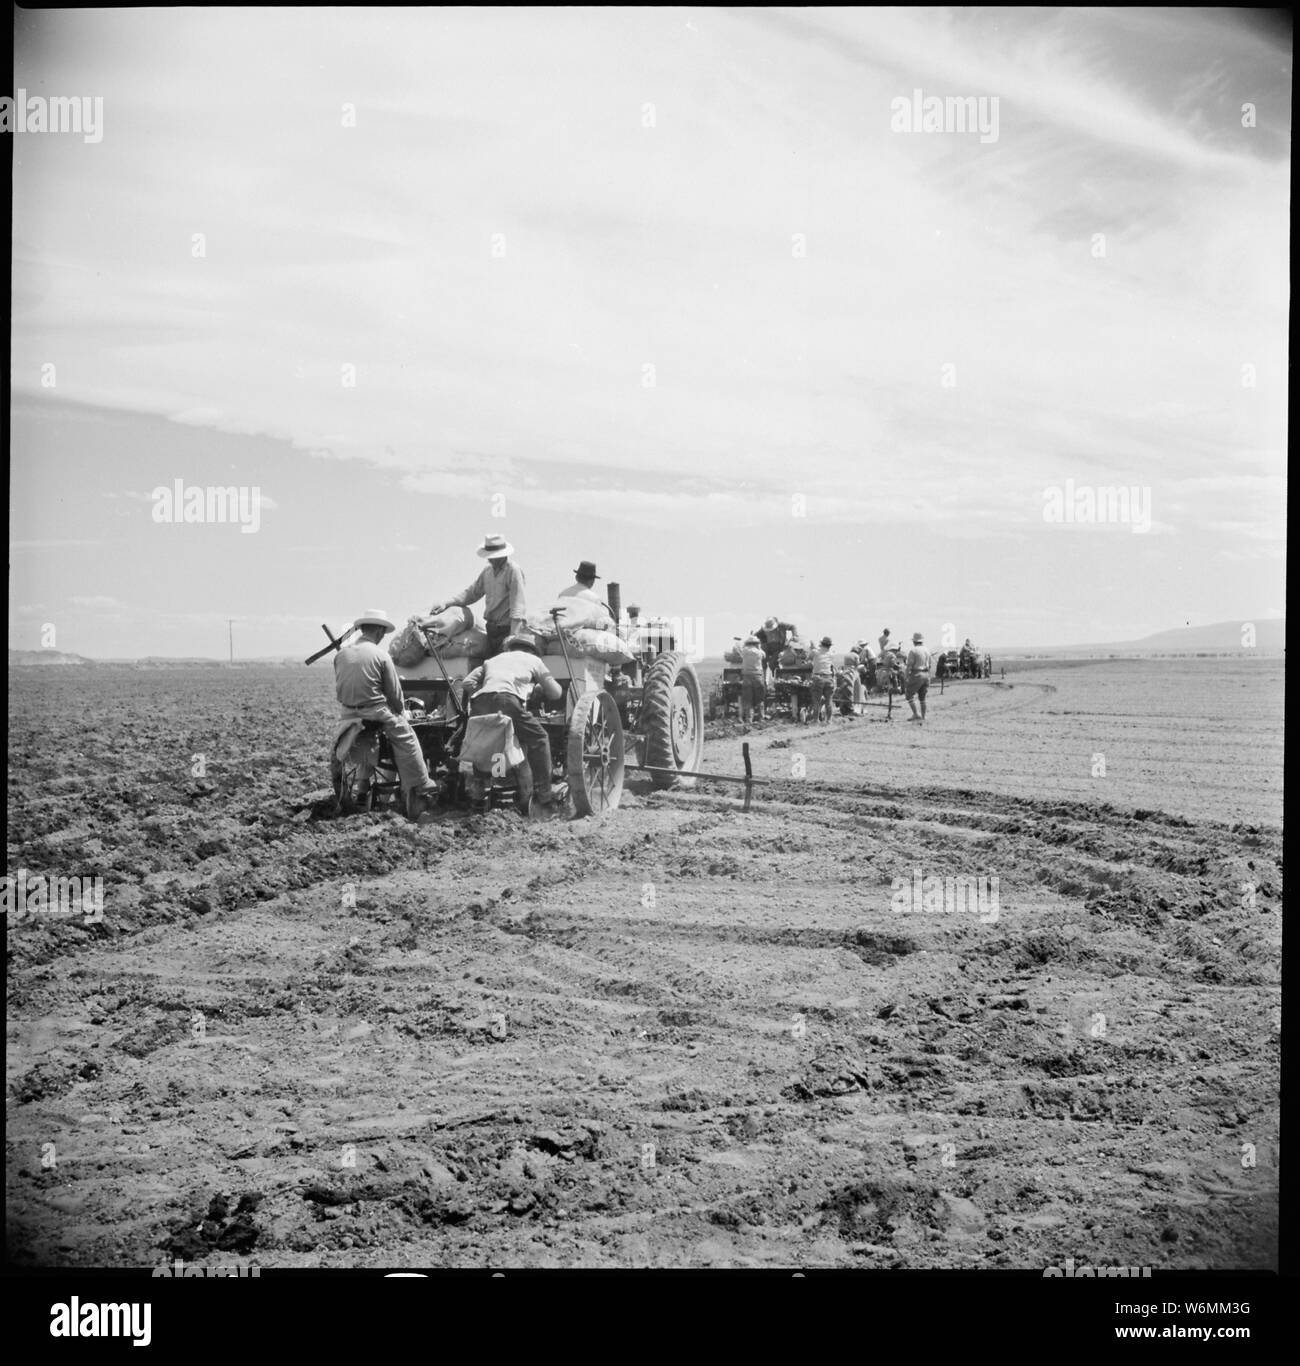 Tule Lake Relocation Center, Newell, California. Four crews of potato planters drop seed potatoes i . . .; Scope and content:  The full caption for this photograph reads: Tule Lake Relocation Center, Newell, California. Four crews of potato planters drop seed potatoes in the rich black soil on the evacuee farm near this War Relocation Center. Stock Photo